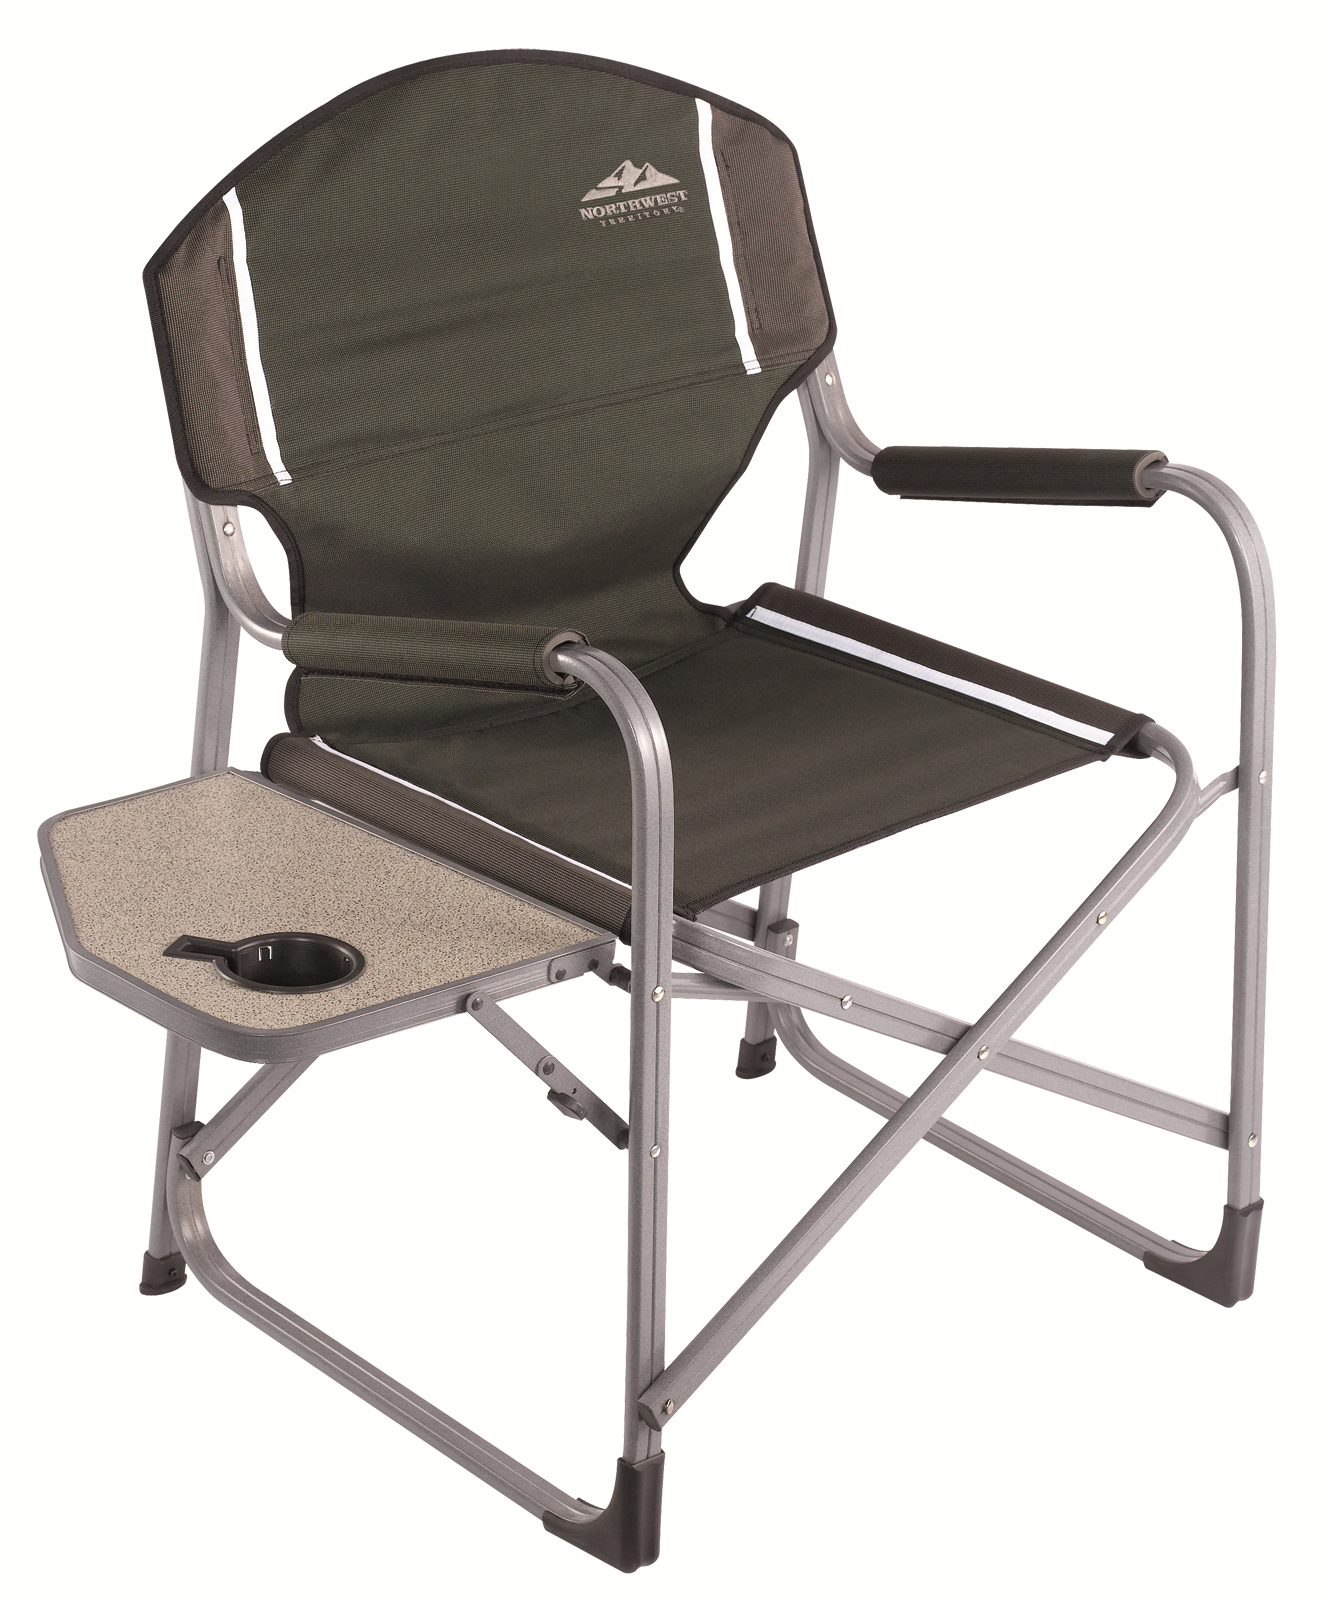 Northwest Territory Director's Chair with Fold-Up Side Table